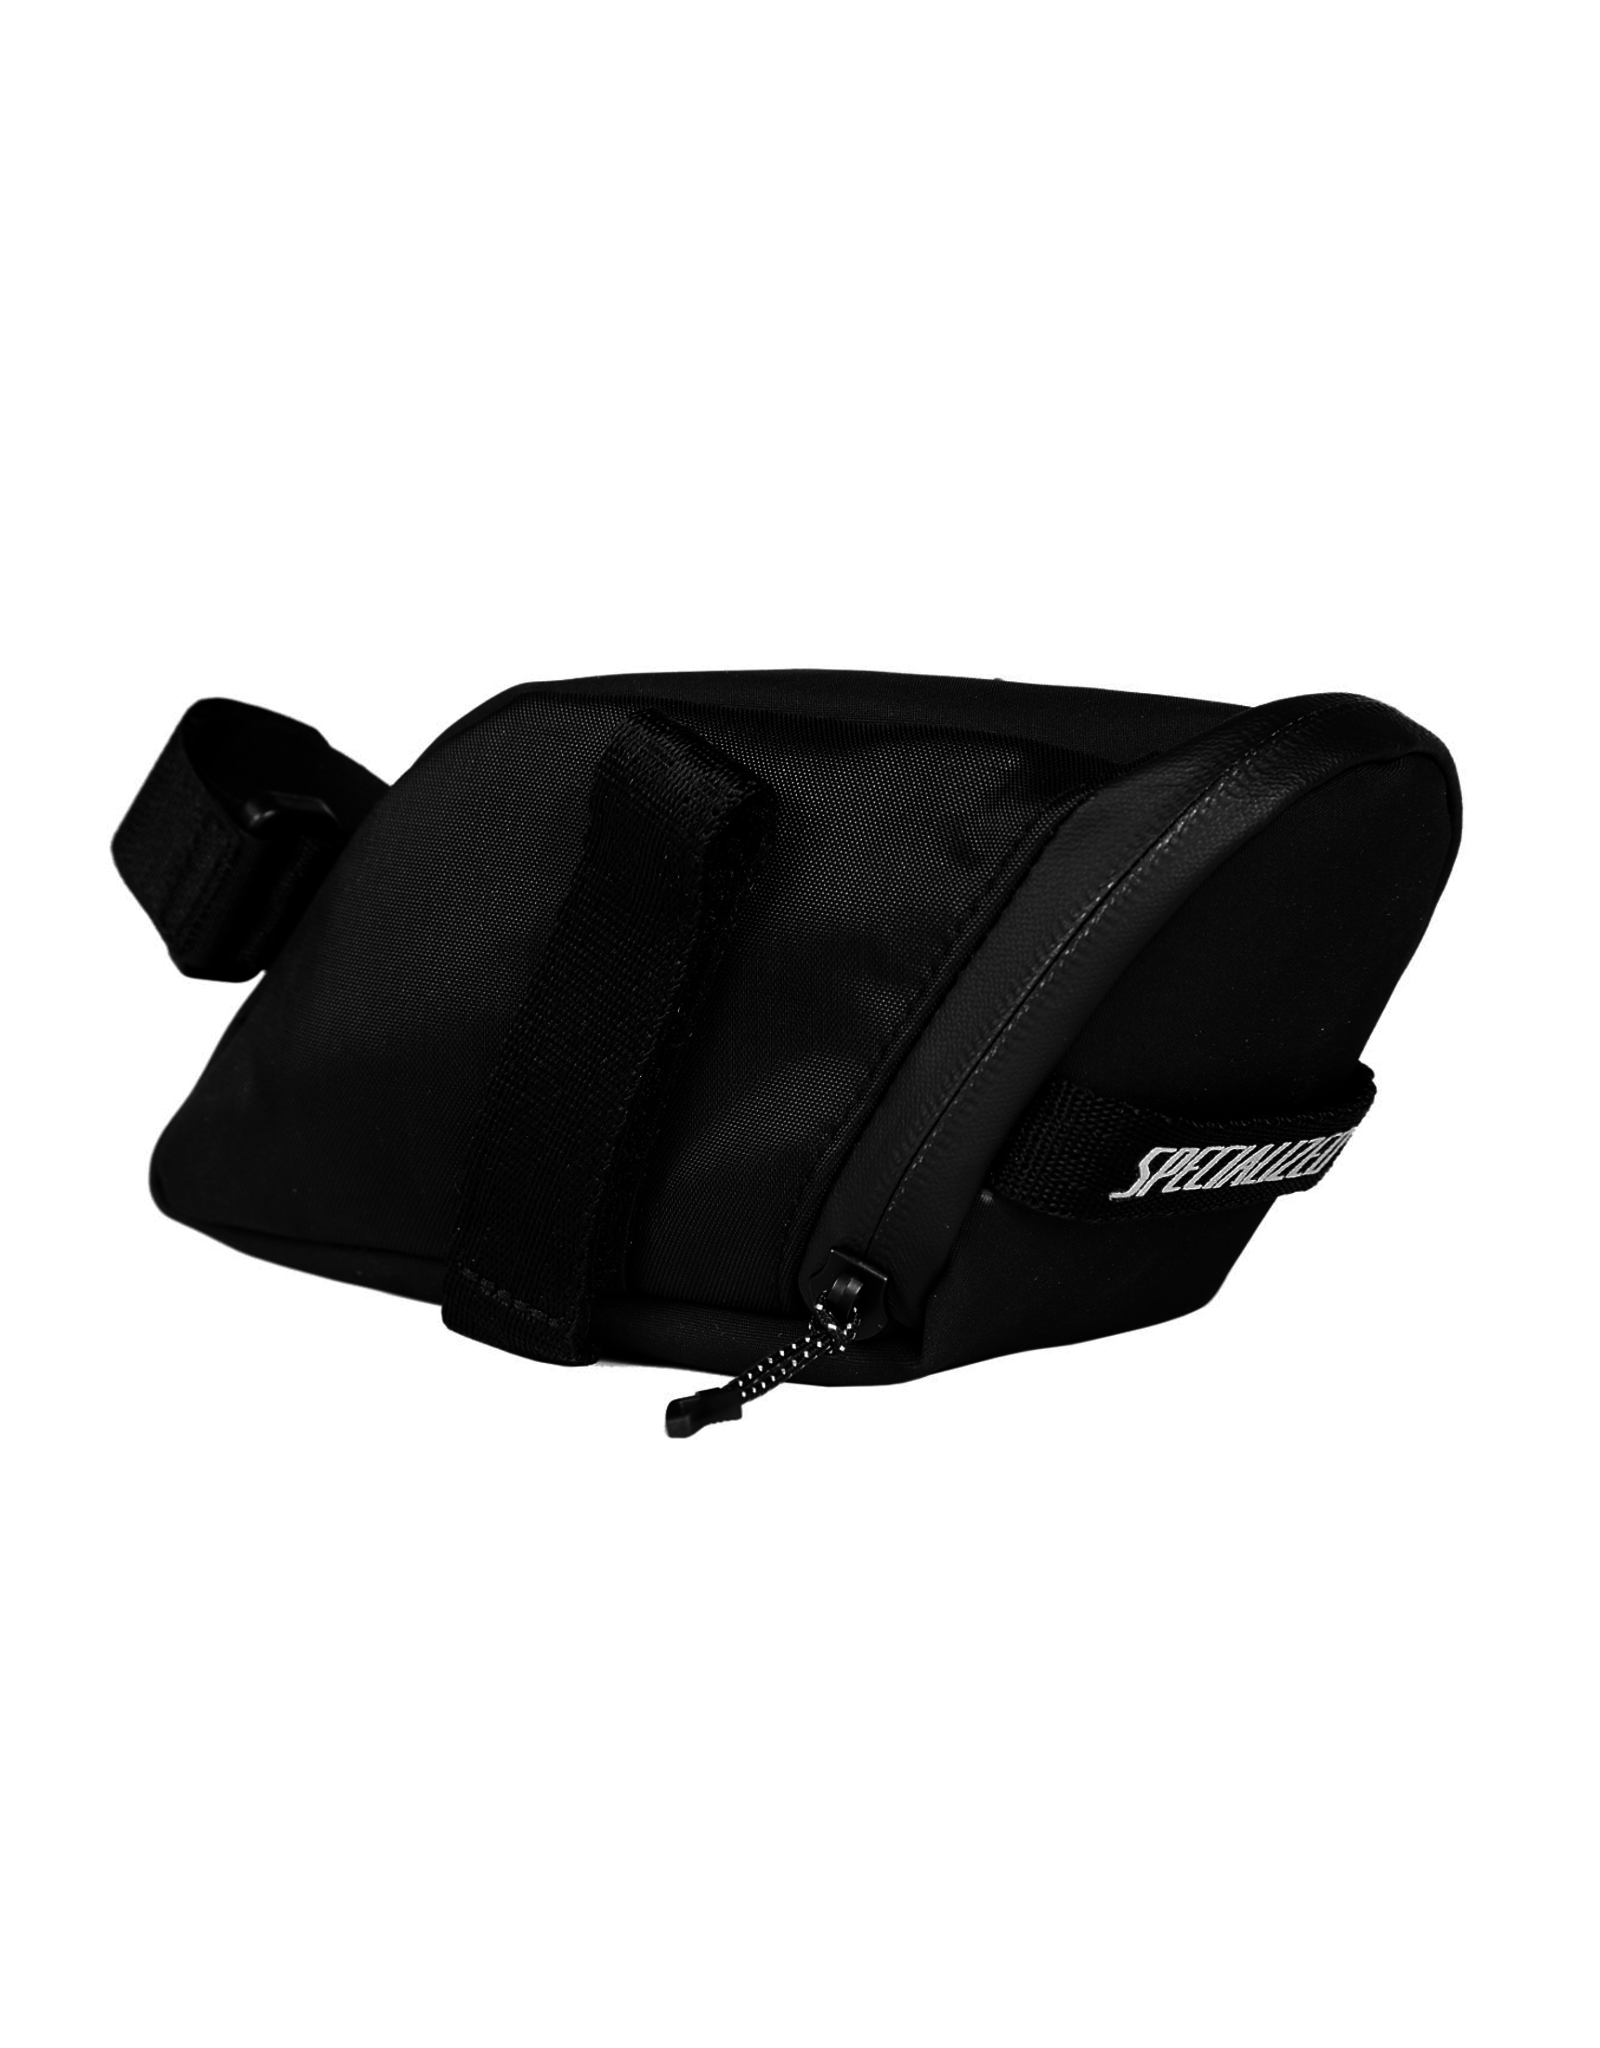 specialized micro wedgie bag